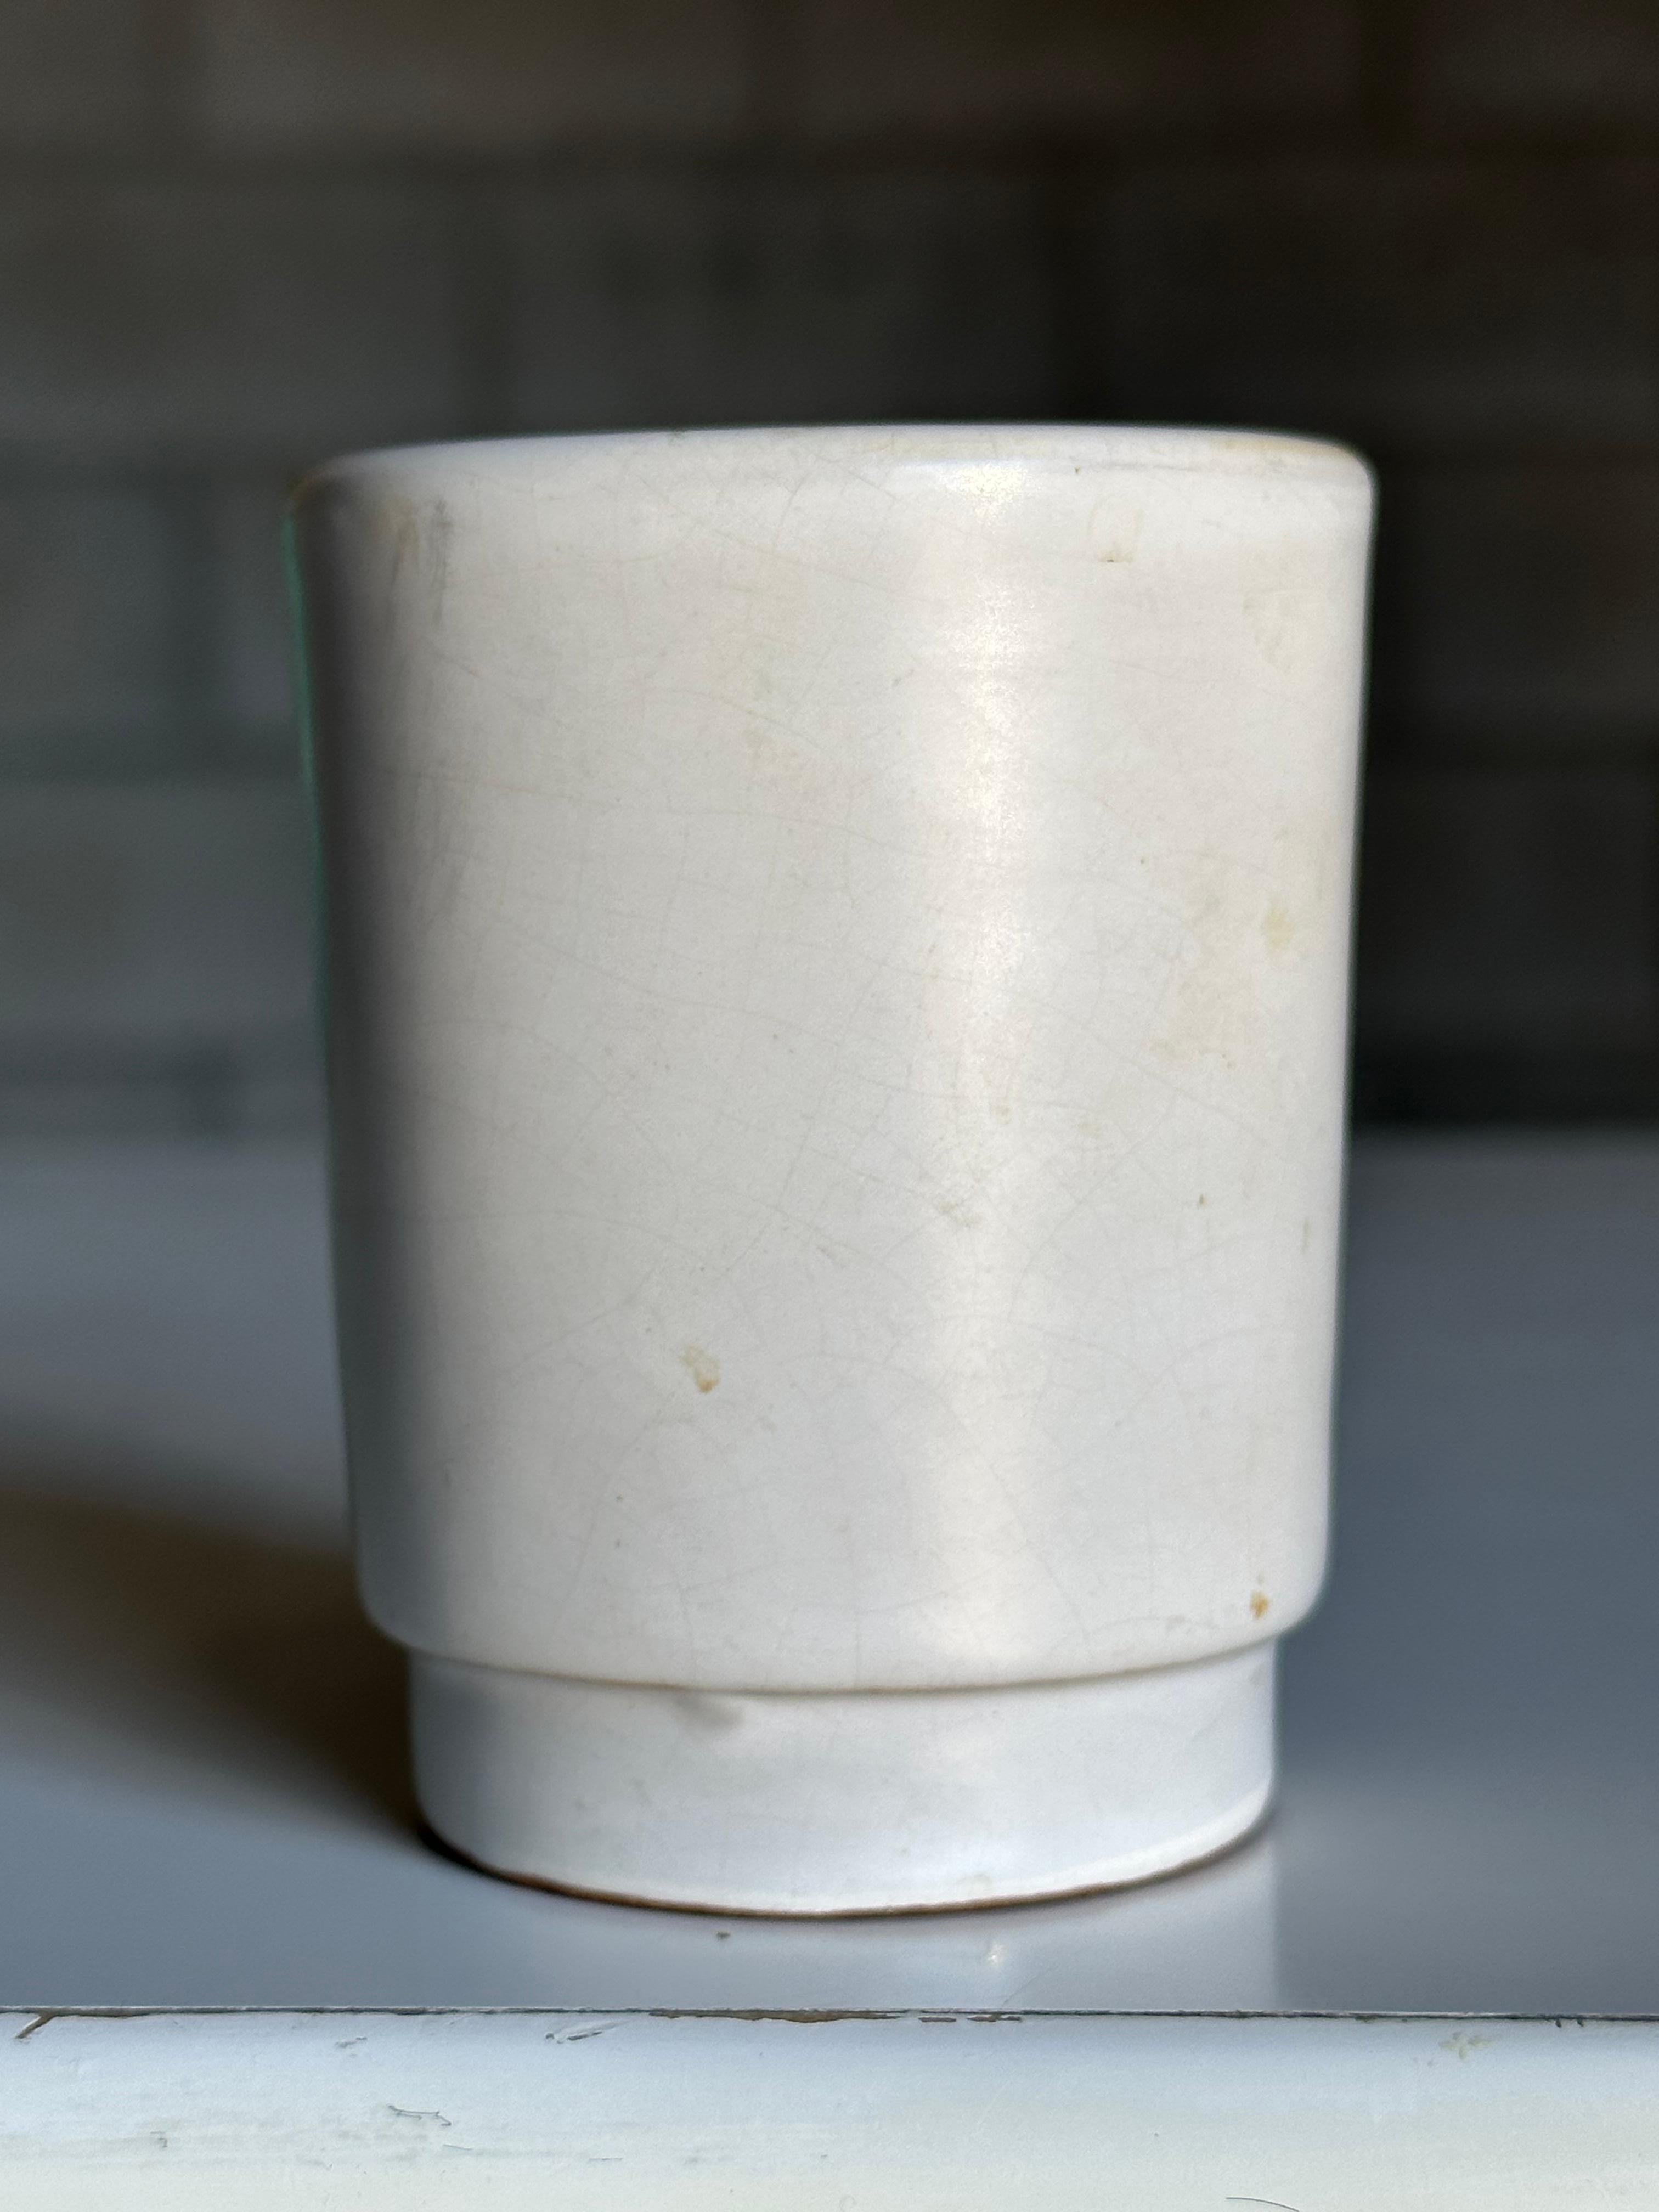 A wonderful small vase produced by Nittsjö and attributed to Jerk Werkmäster. Great classic form vase with minimalist palette would allow for use in a variety of interior decors- minimalist, modern, contemporary, organic modern, Scandinavian, etc. 
